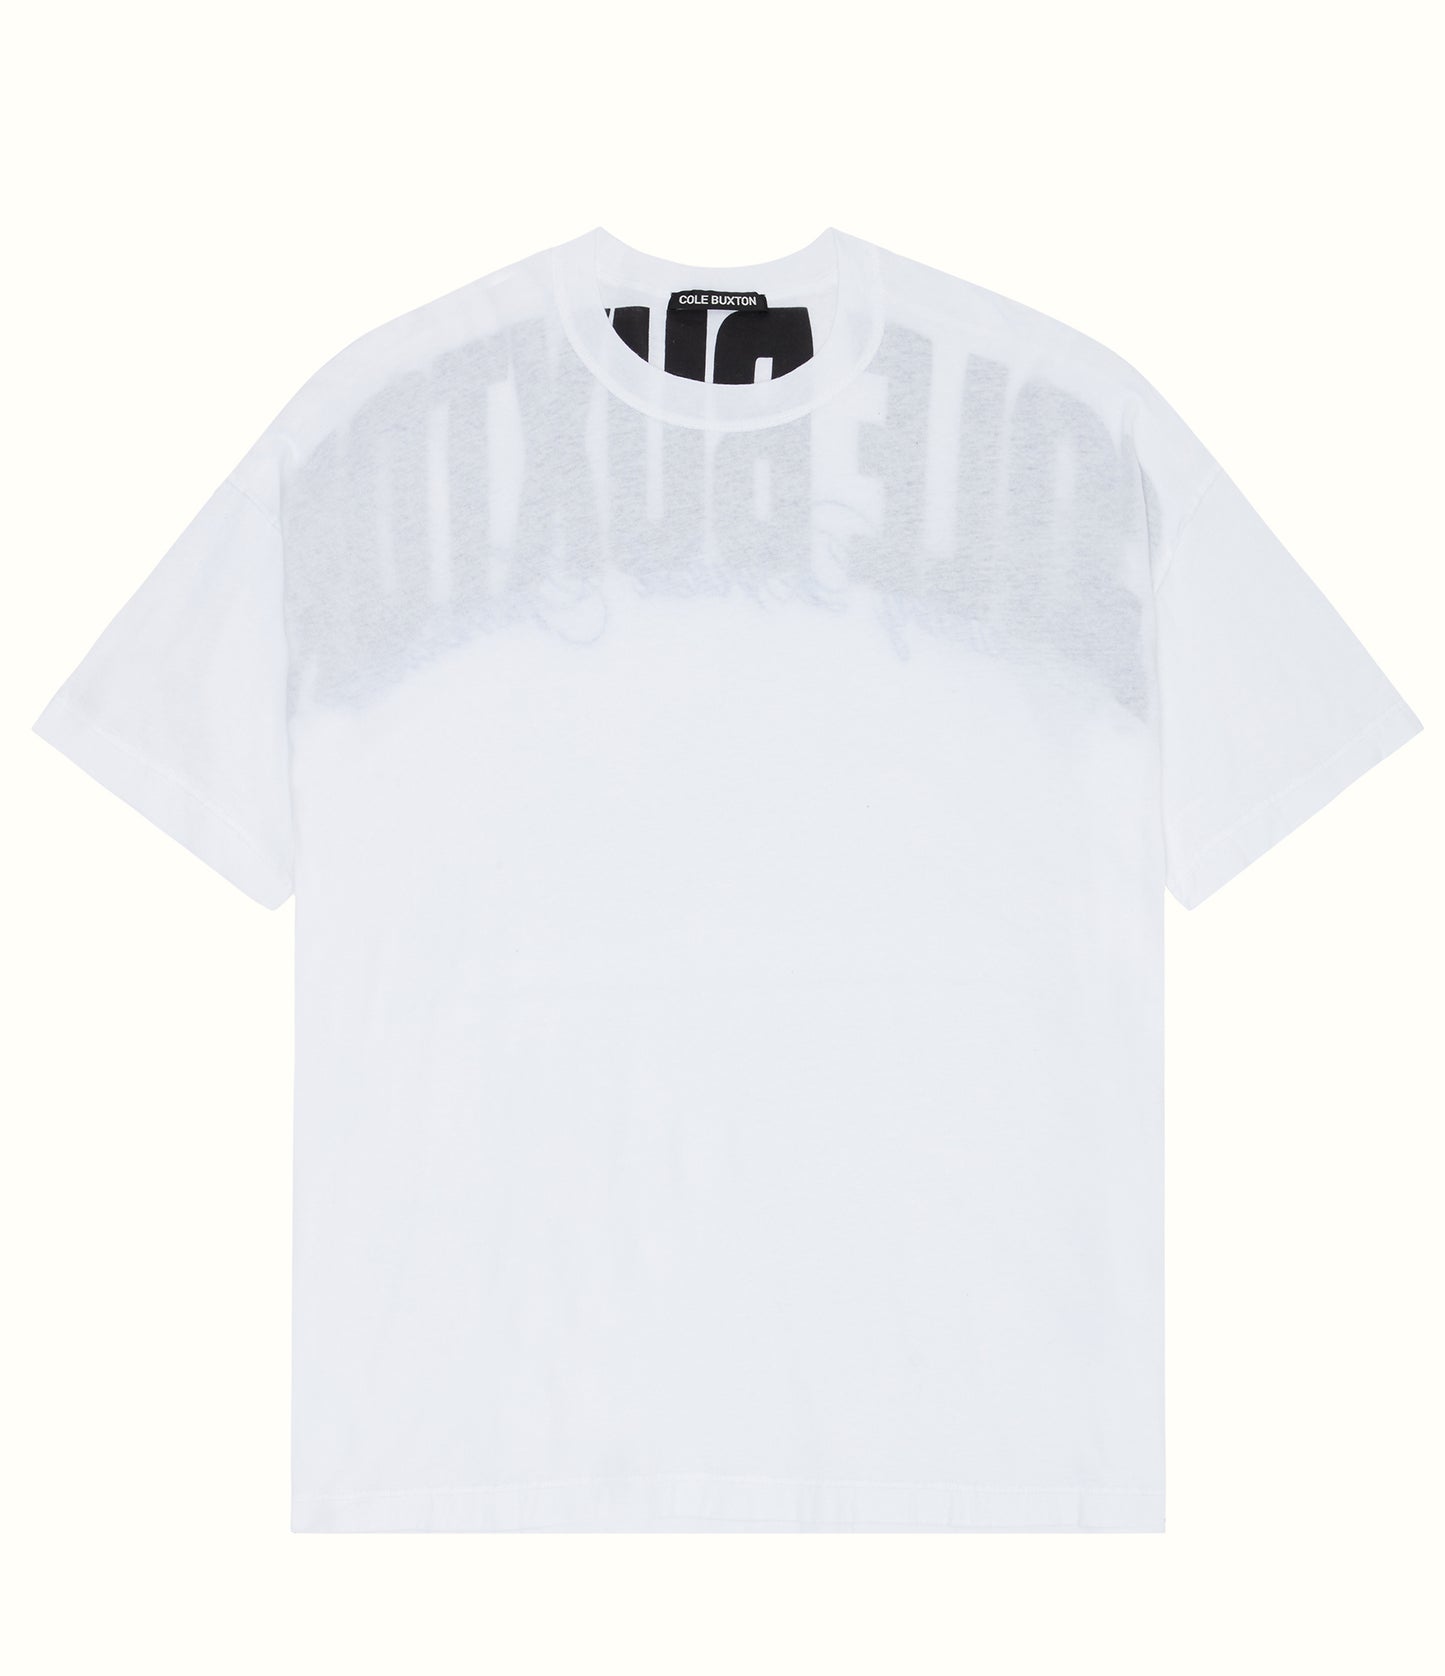 INSIDE OUT ARCH LOGO T-SHIRT